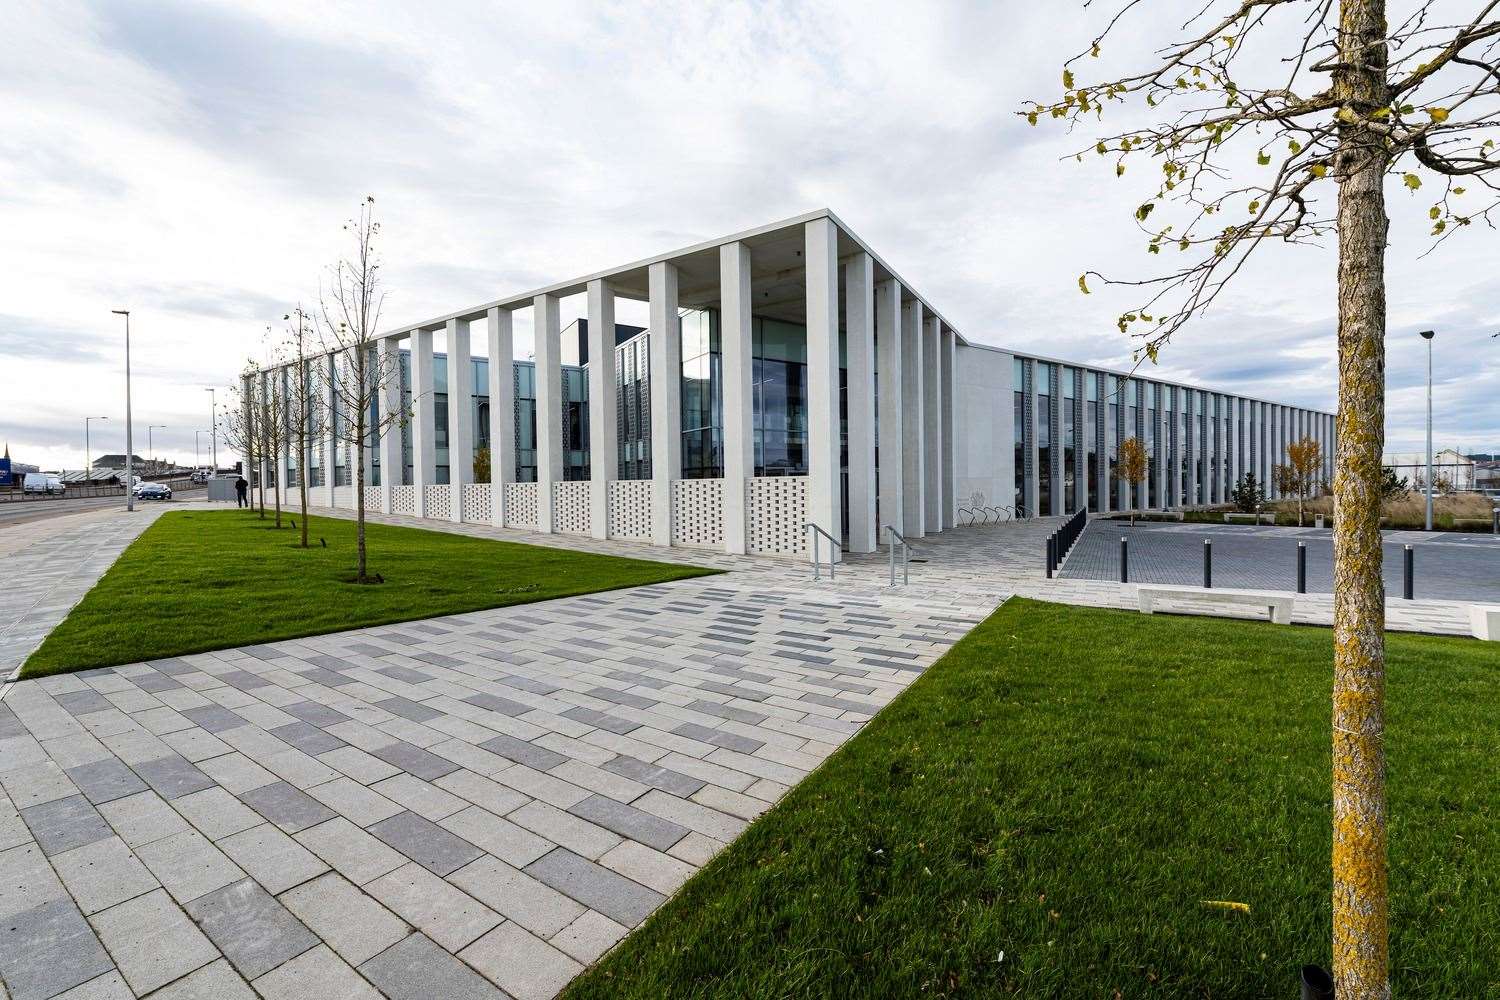 Inverness Justice Centre was completed by Robertson Construction.